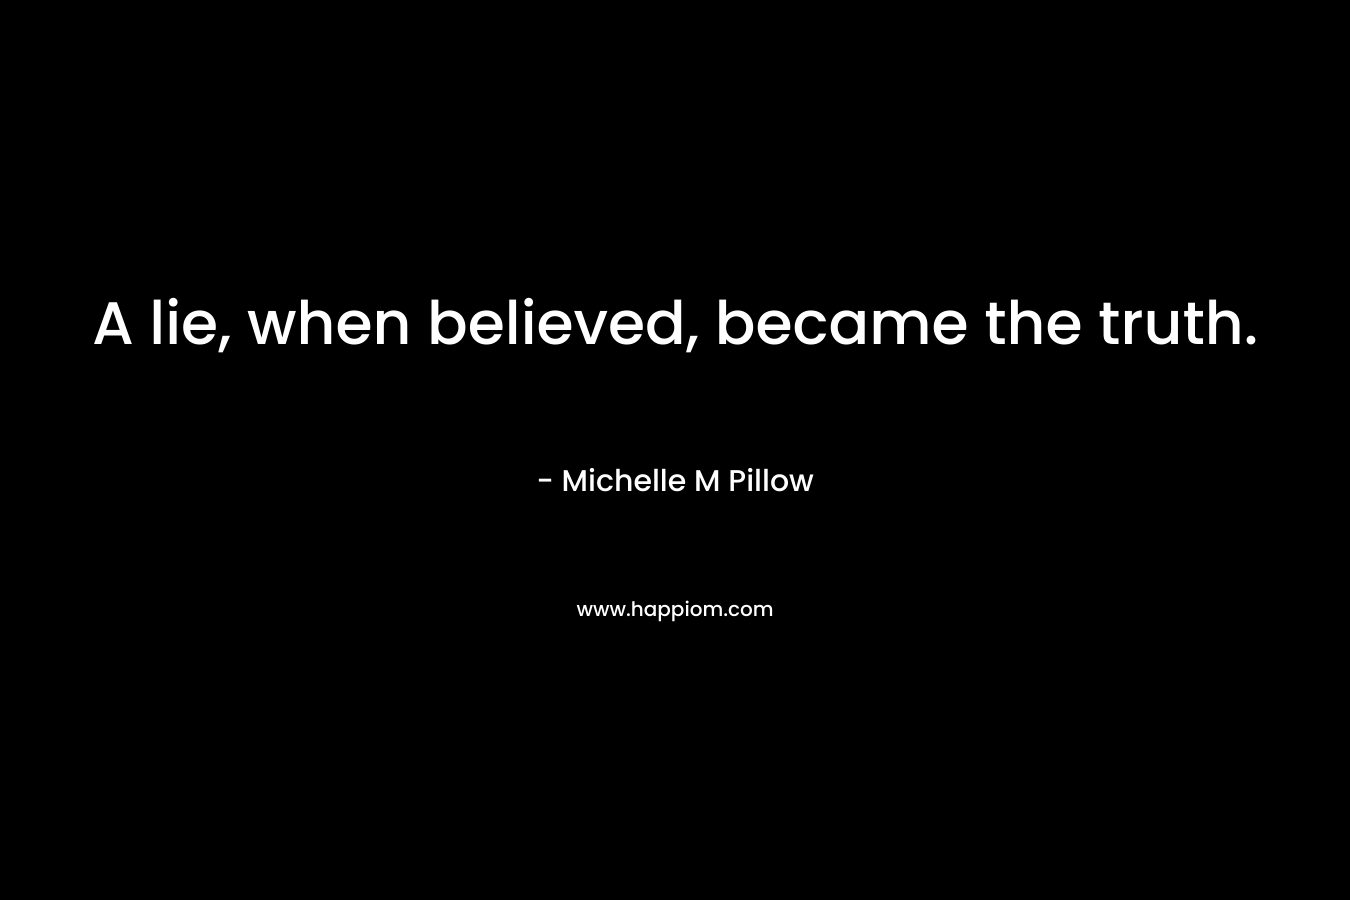 A lie, when believed, became the truth. – Michelle M Pillow